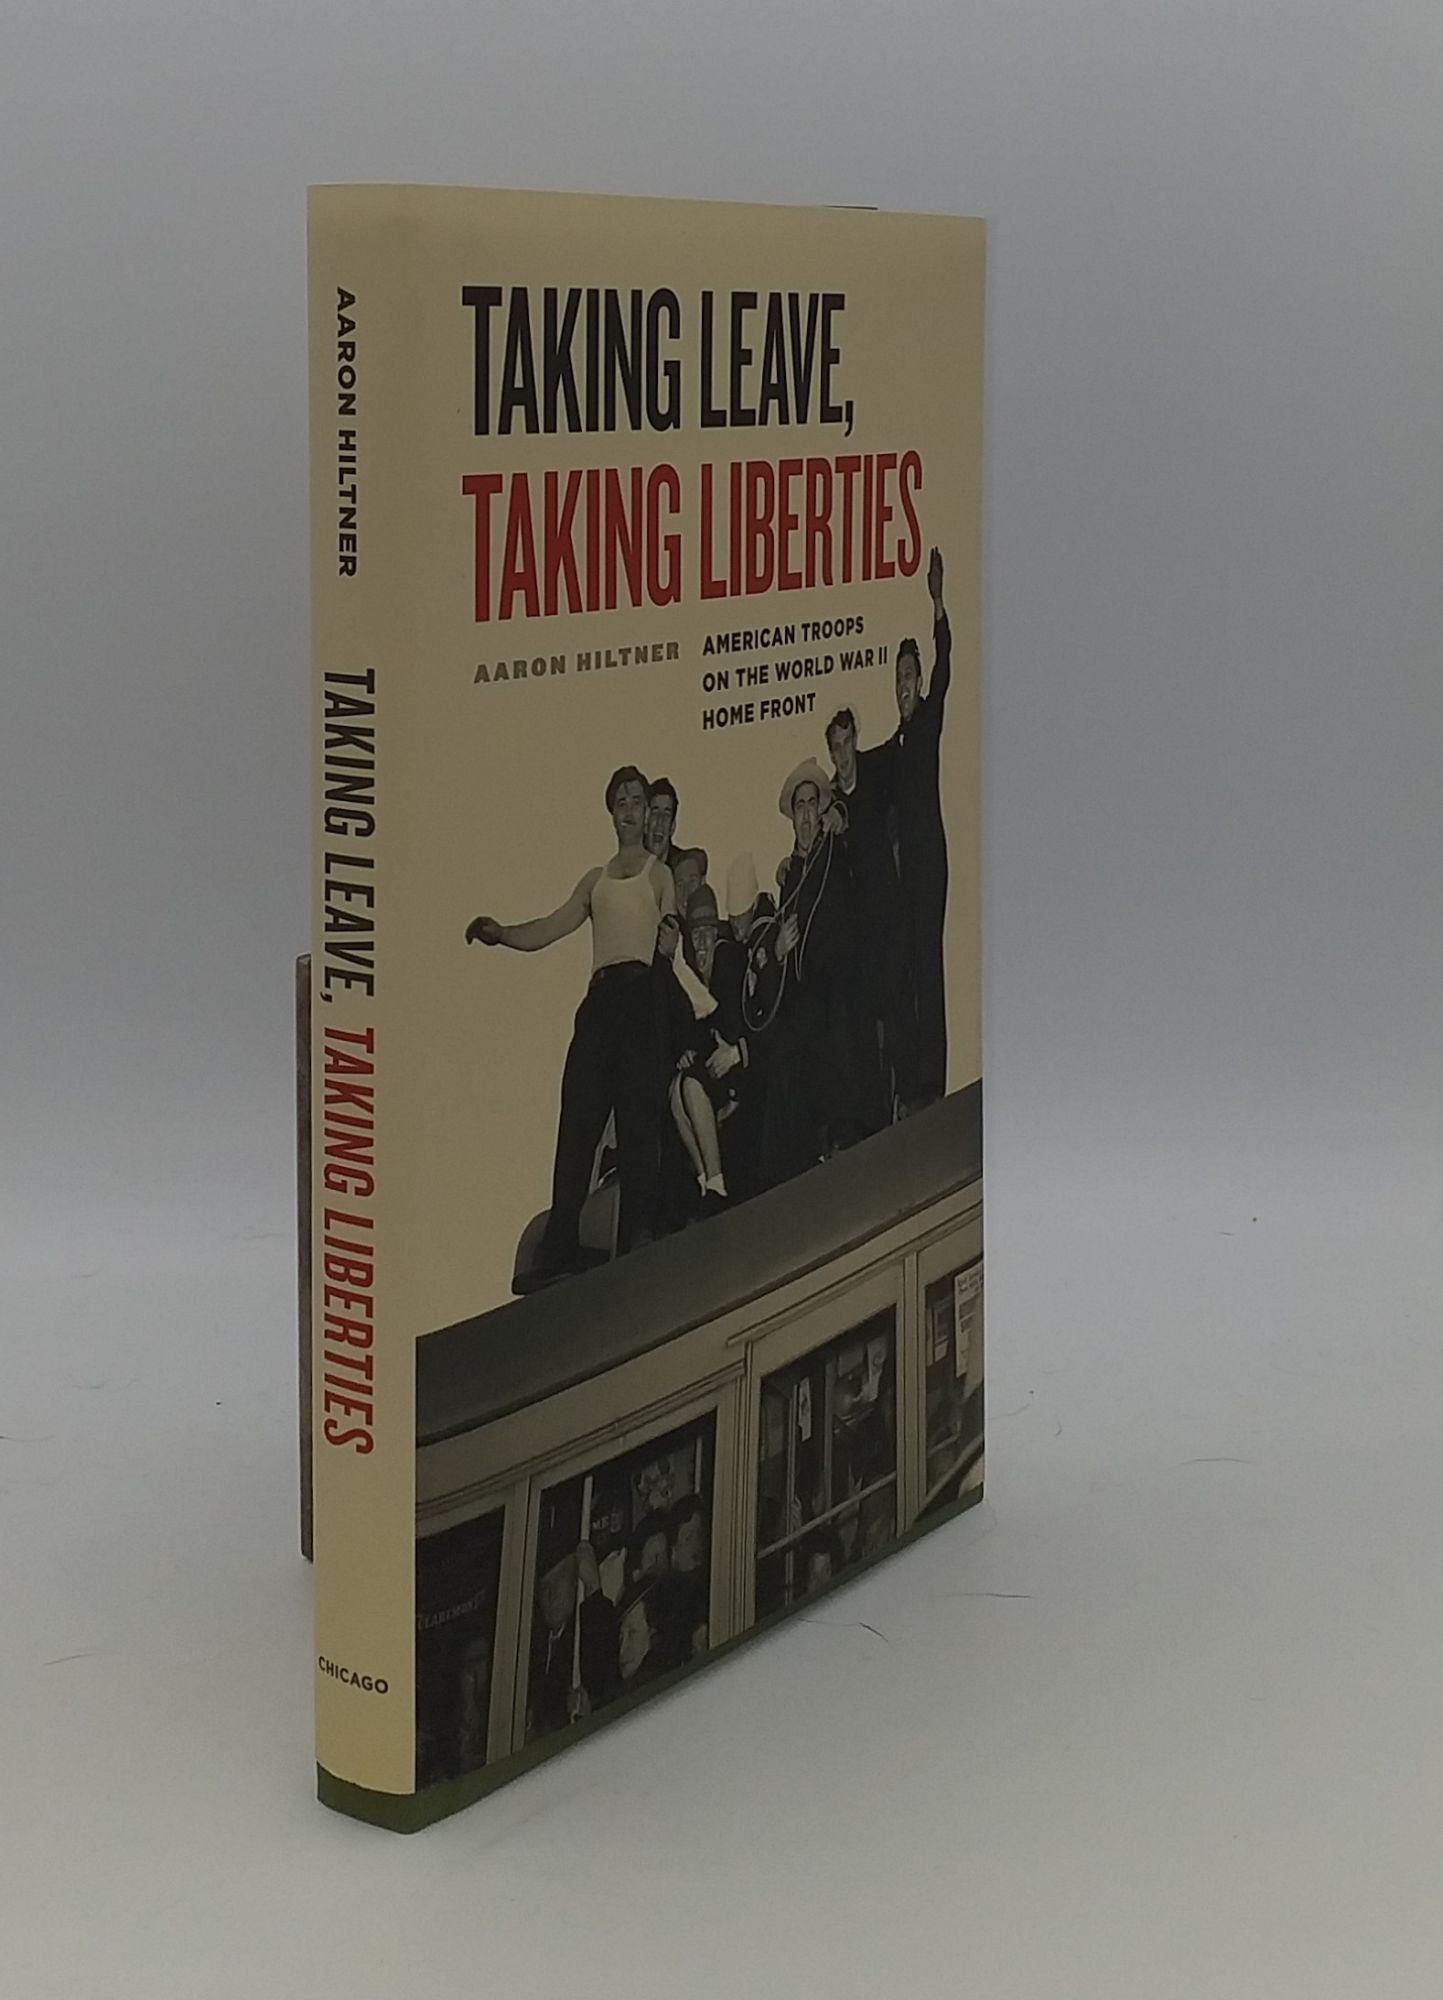 HILTNER Aaron - Taking Leave Taking Liberties American Troops on the World War II Home Front